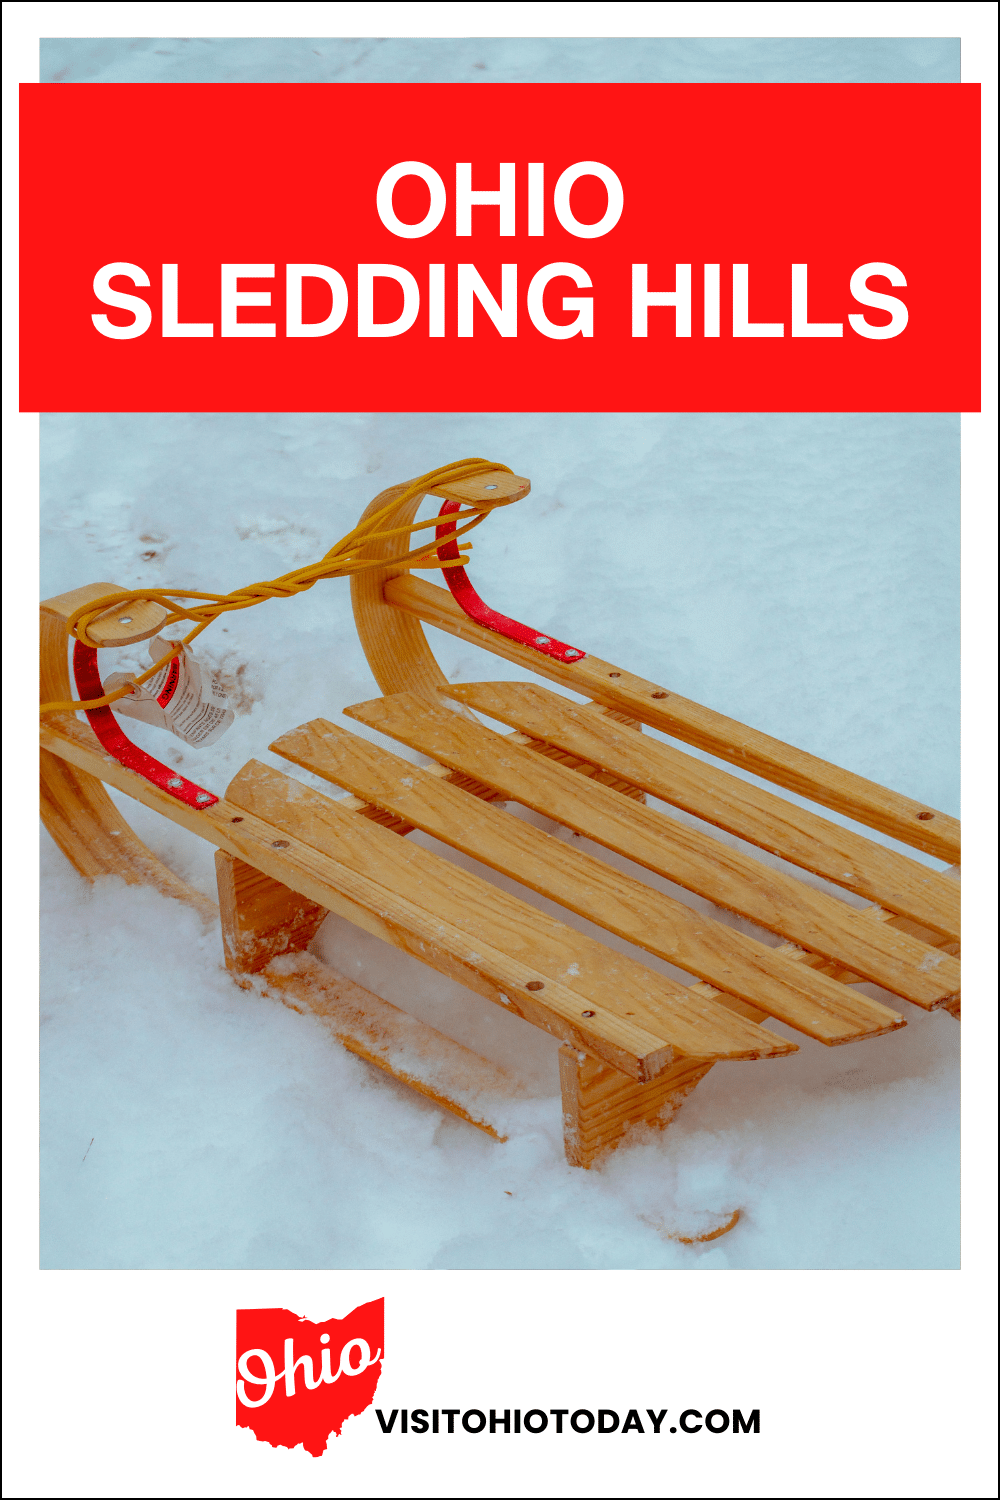 vertical image with a photo of a wooden sled in the snow. A red strip across the top has the text Ohio Sledding Hills